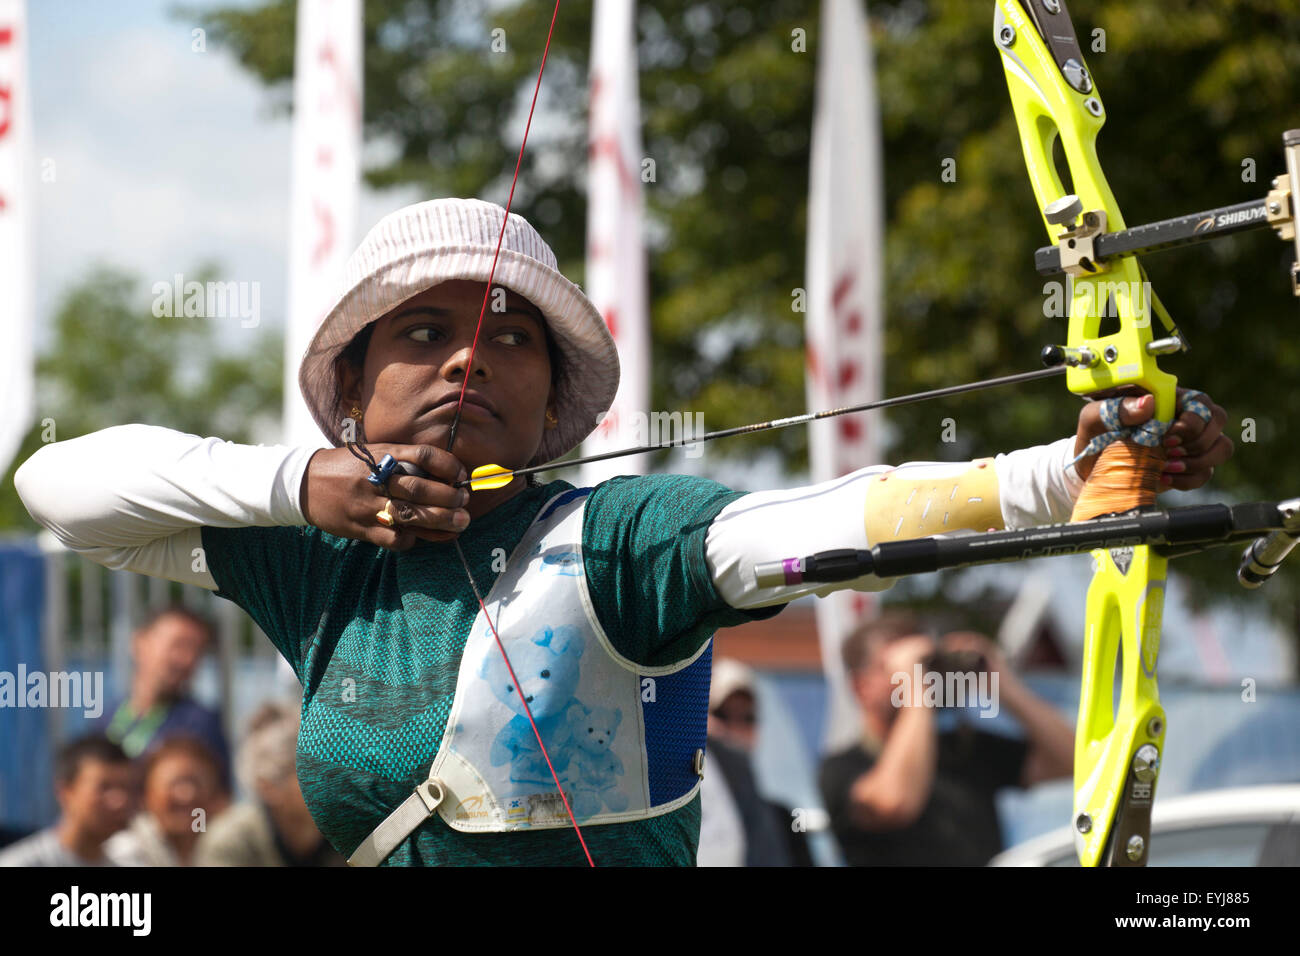 Copenhagen, Denmark, July 30th, 2015: Indian archer Laxmirani  Mahji competes in the World Archery Championships in Copenhagen during Thursday's individual matches  in recurve bow. Credit:  OJPHOTOS/Alamy Live News Stock Photo